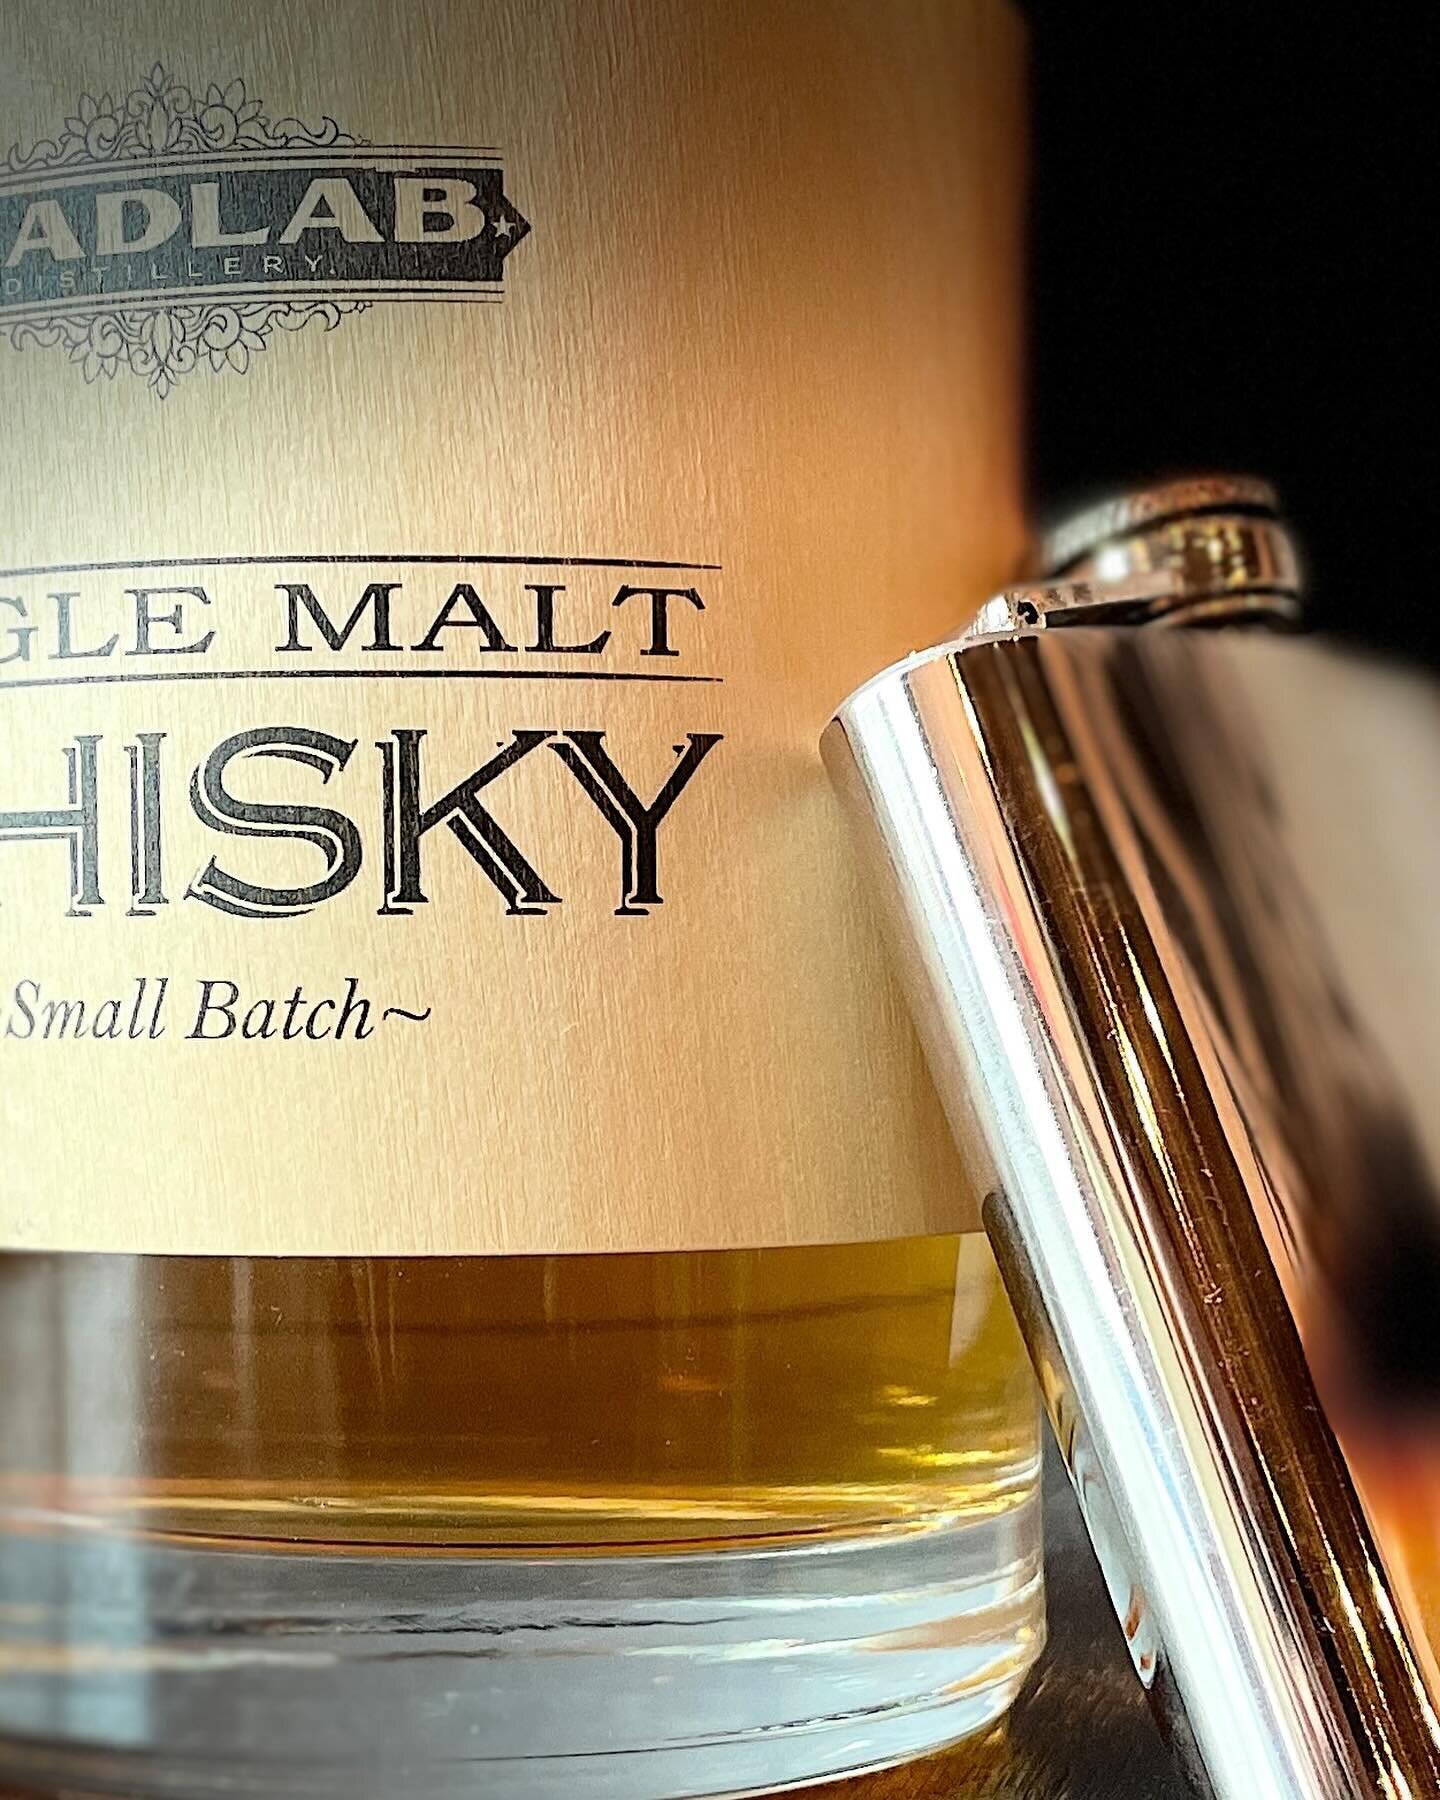 If you&rsquo;re just having a wee nip, make sure it&rsquo;s the good stuff 😜

#flask #walkingdrink #hipflask #whiskylover #yvrwhisky #canadianwhisky #yvrdrinks #vancouverwhisky #bcwhisky #bcdistilled #madlab #drinklocal #craftwhisky #vancitydrinks #